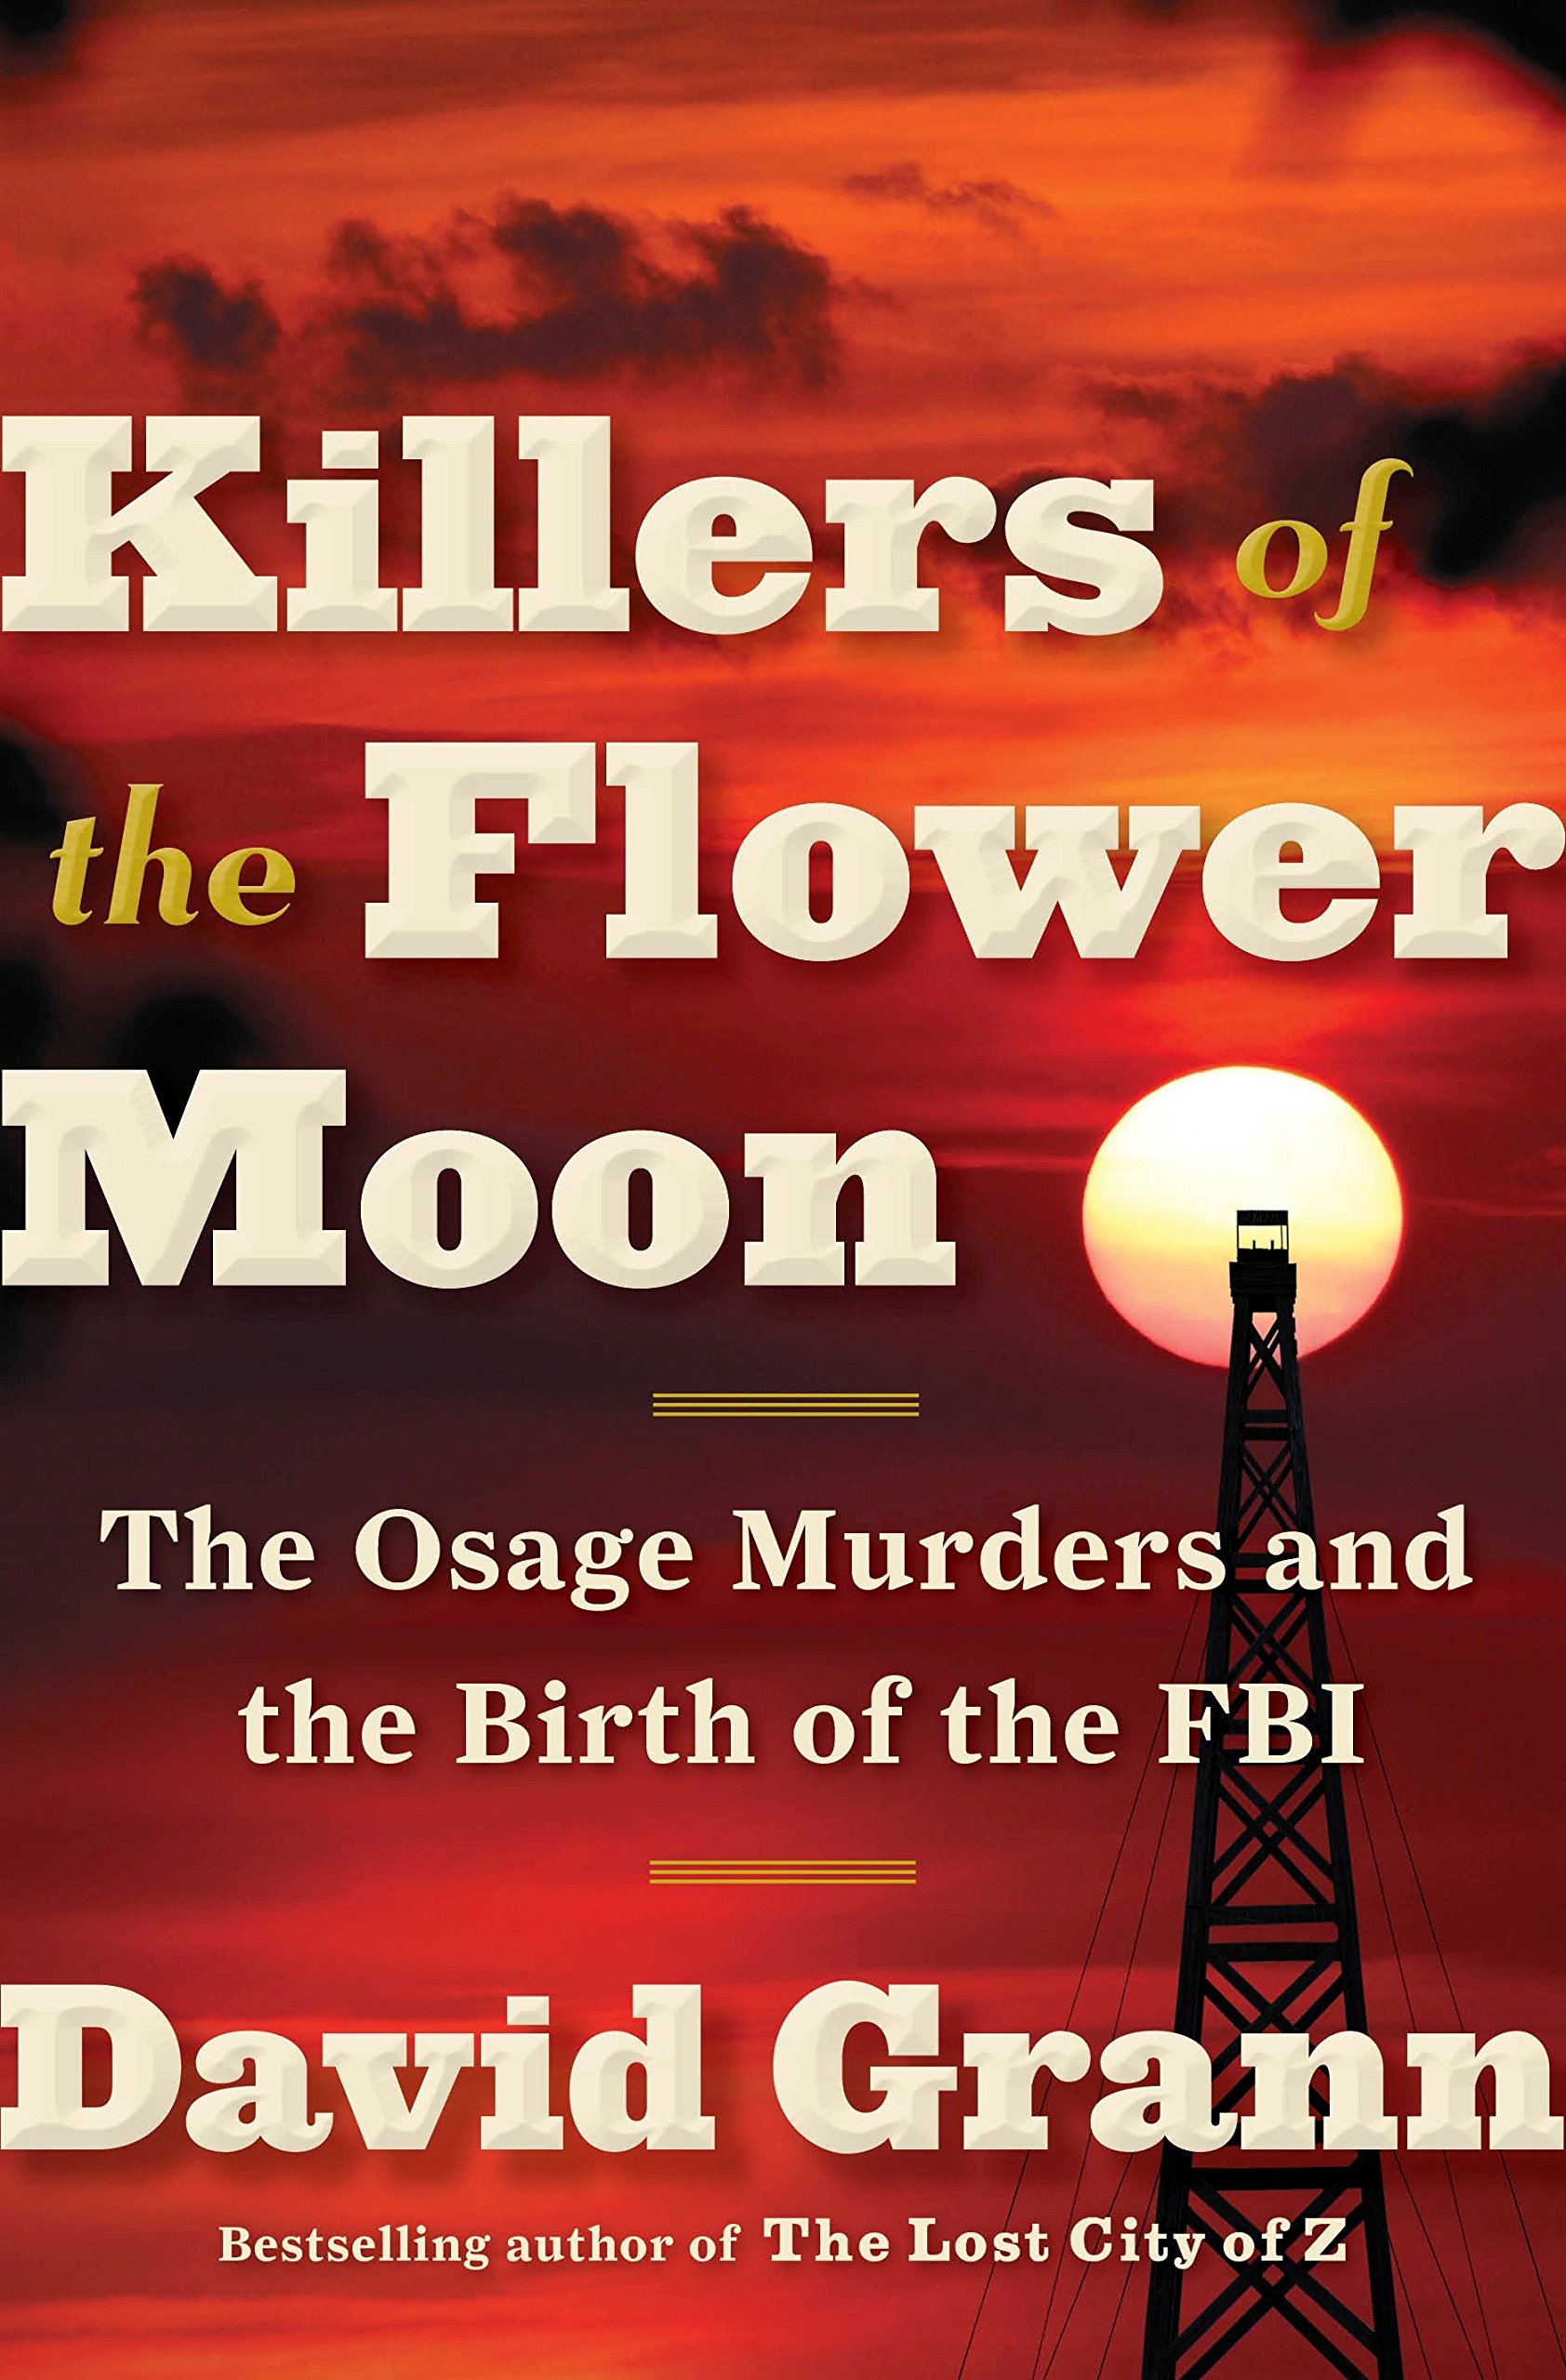 The Killers of the Flower Moon: The Osage Murders and the Birth of the FBI by David Grann